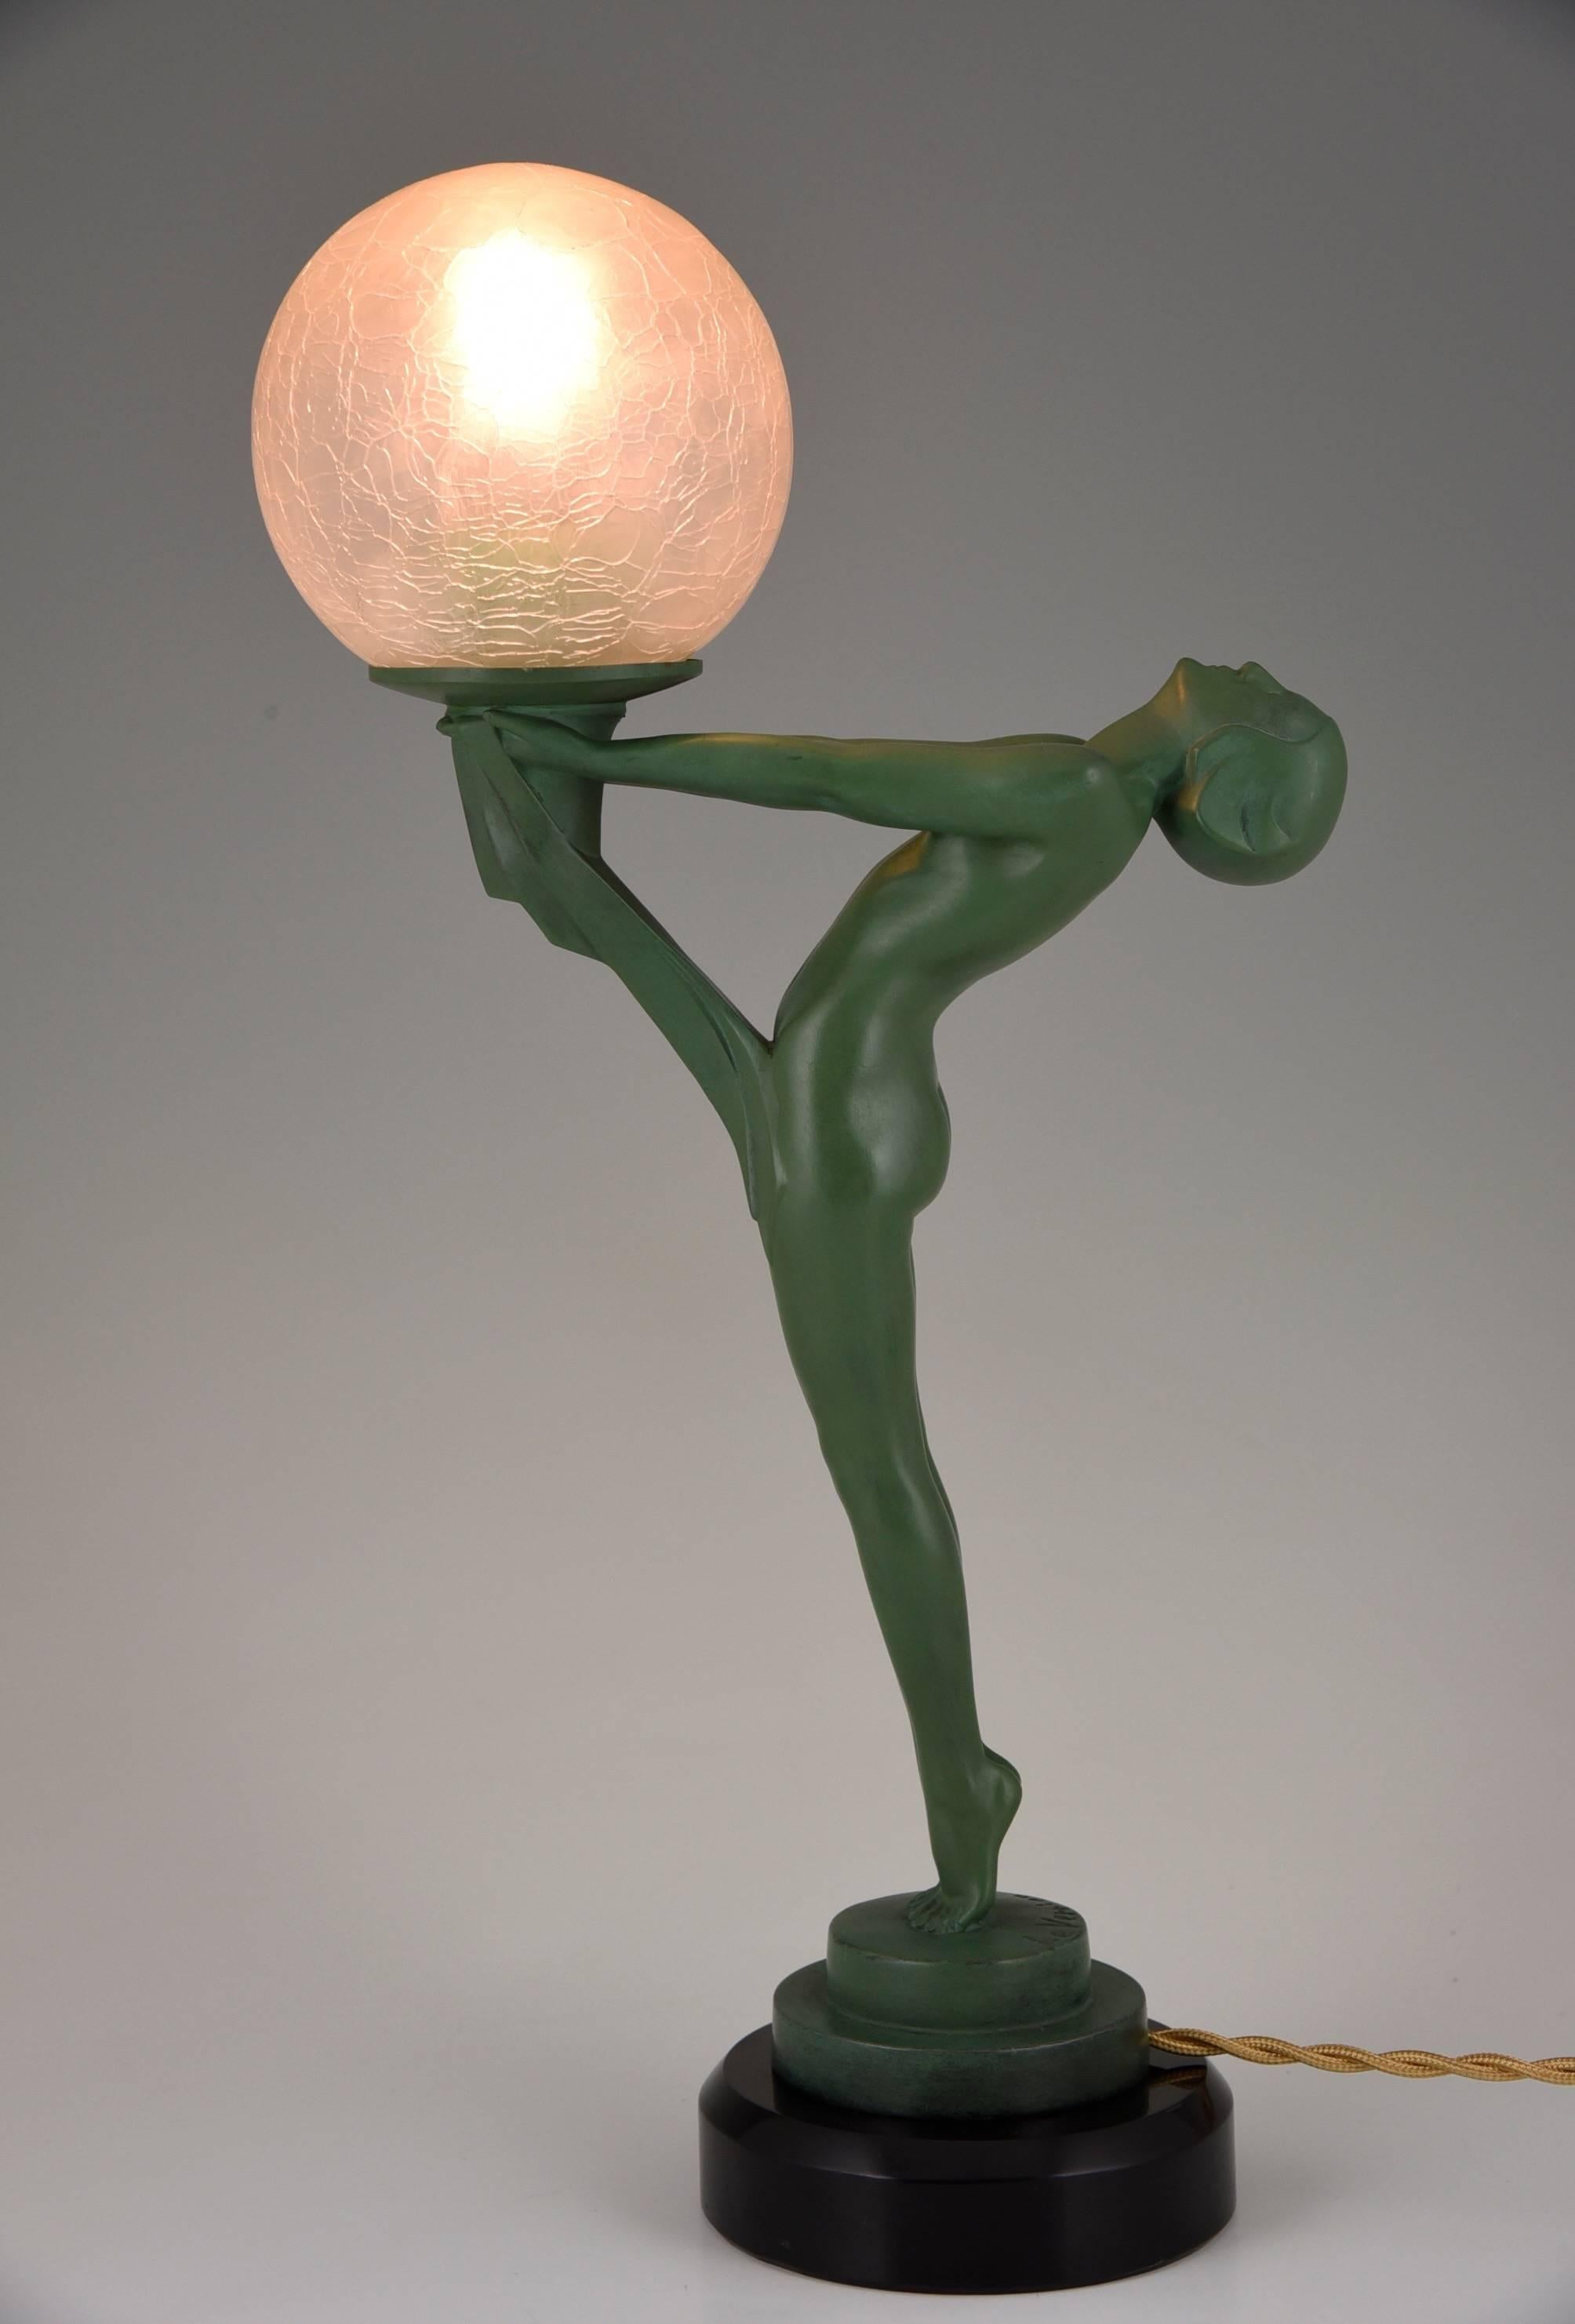 Art Deco figural table lamp of a standing nude holding a glass shade.

Artist / Maker:.
Max Le Verrier. 

Signature / Marks: 
Le Verrier. 

Style:
Art Deco.

Date:
1930.

Material: 
Green patinated metal.
Black marble base.
Crackled